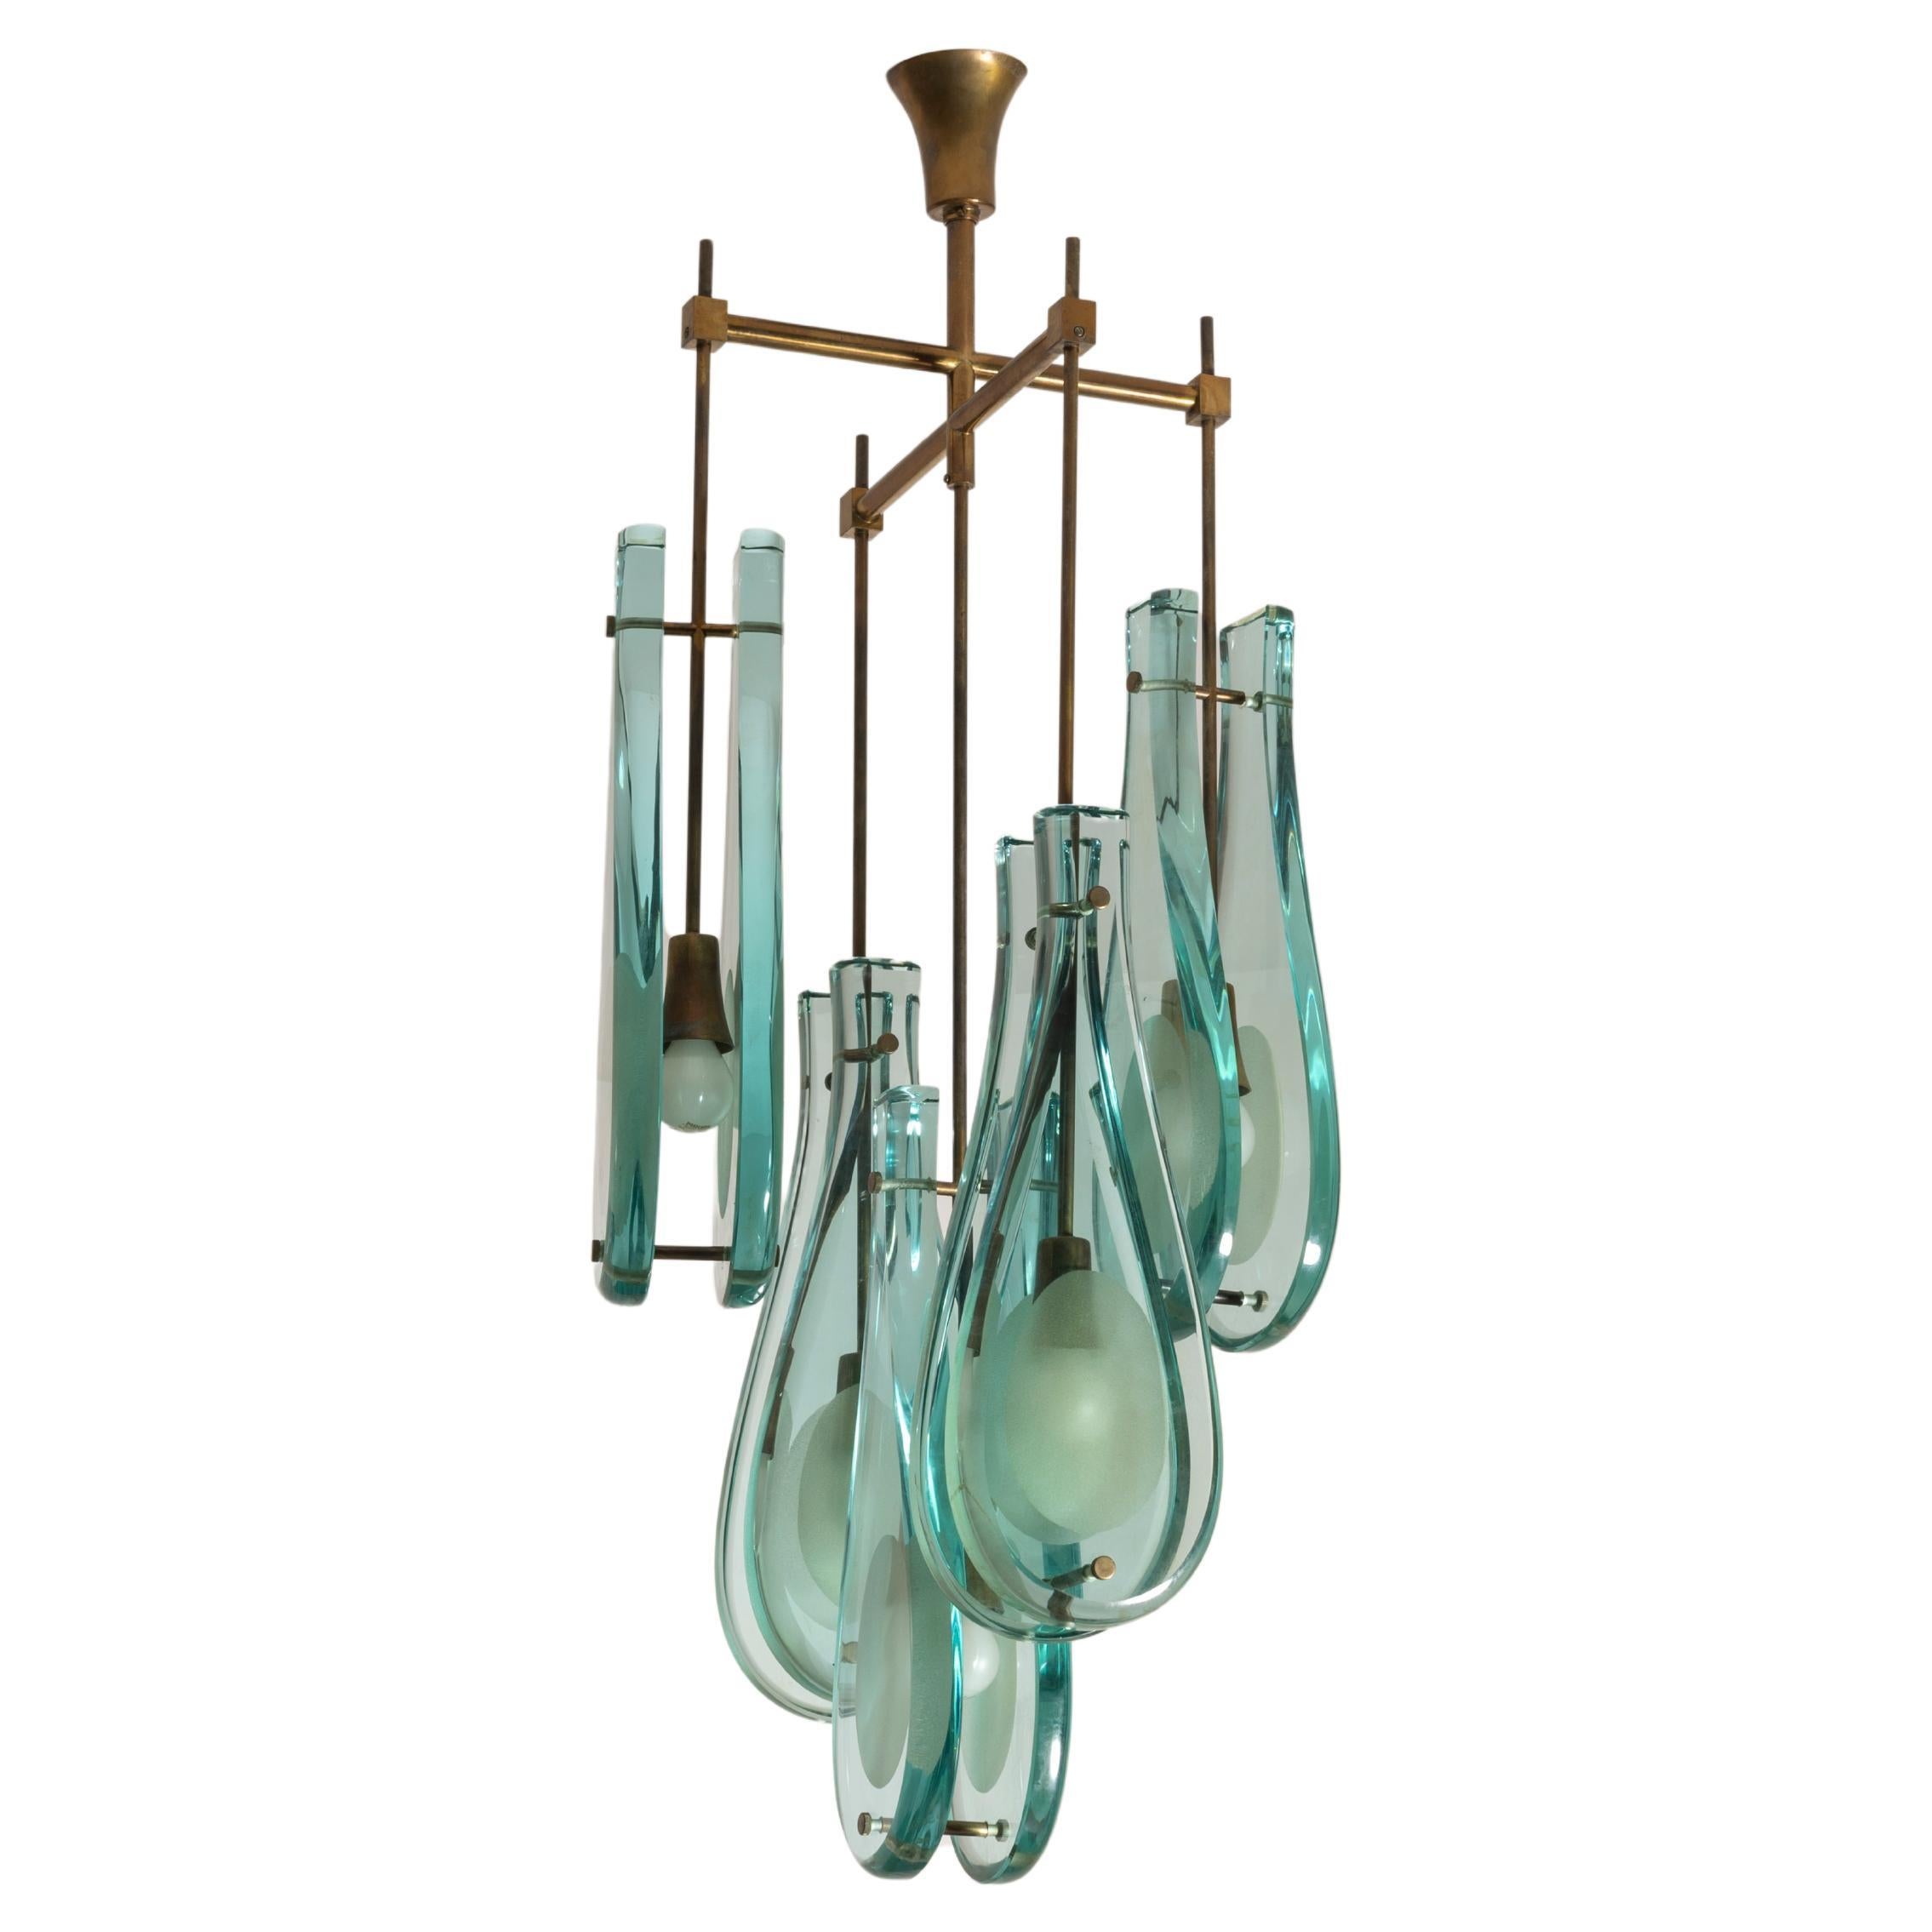 Max Ingrand model 2338 glass and brass chandelier by Fontana Arte, Italy, 1960s For Sale